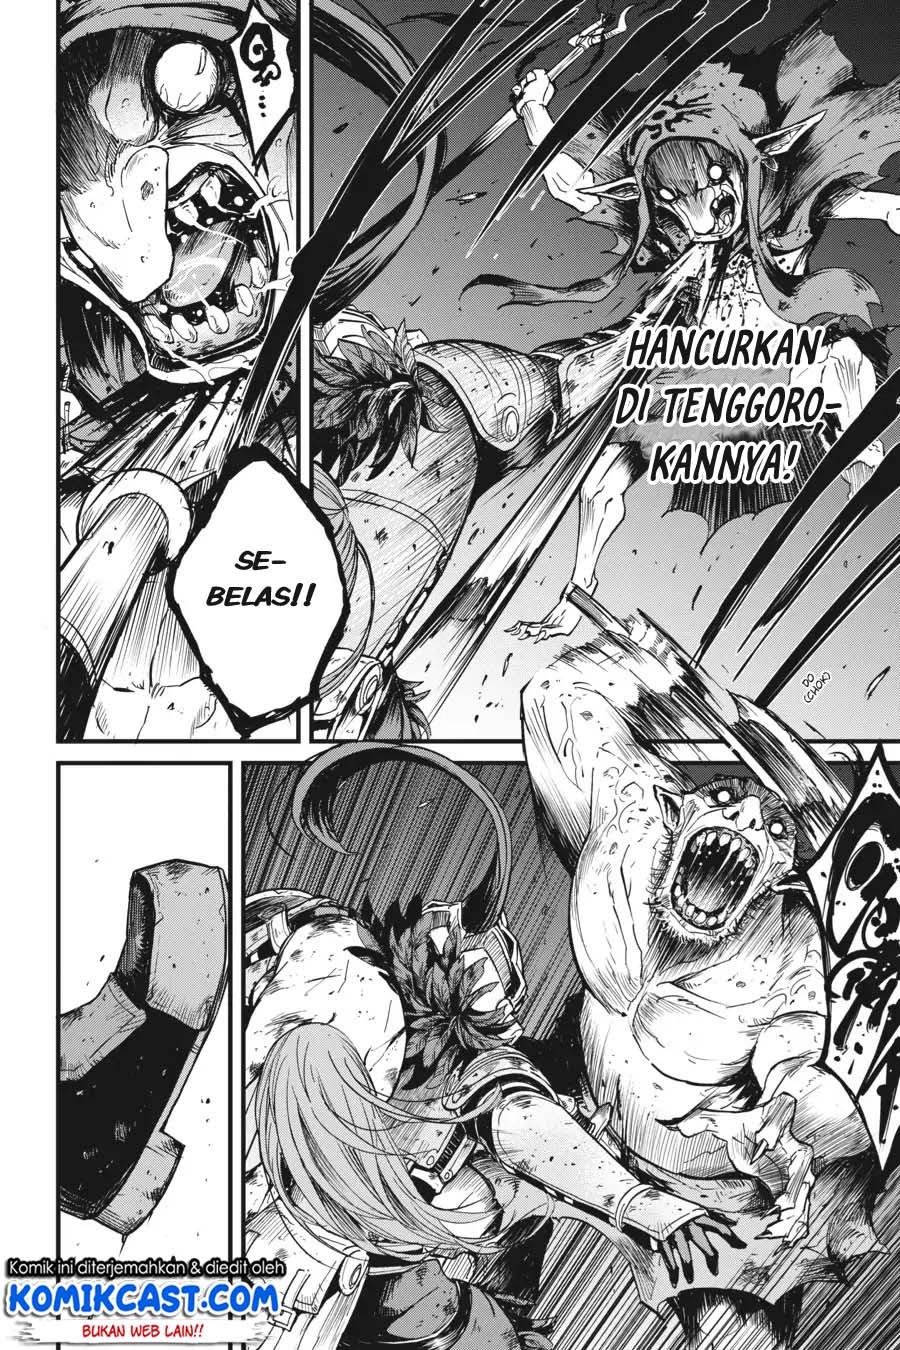 Goblin Slayer: Side Story Year One Chapter 26